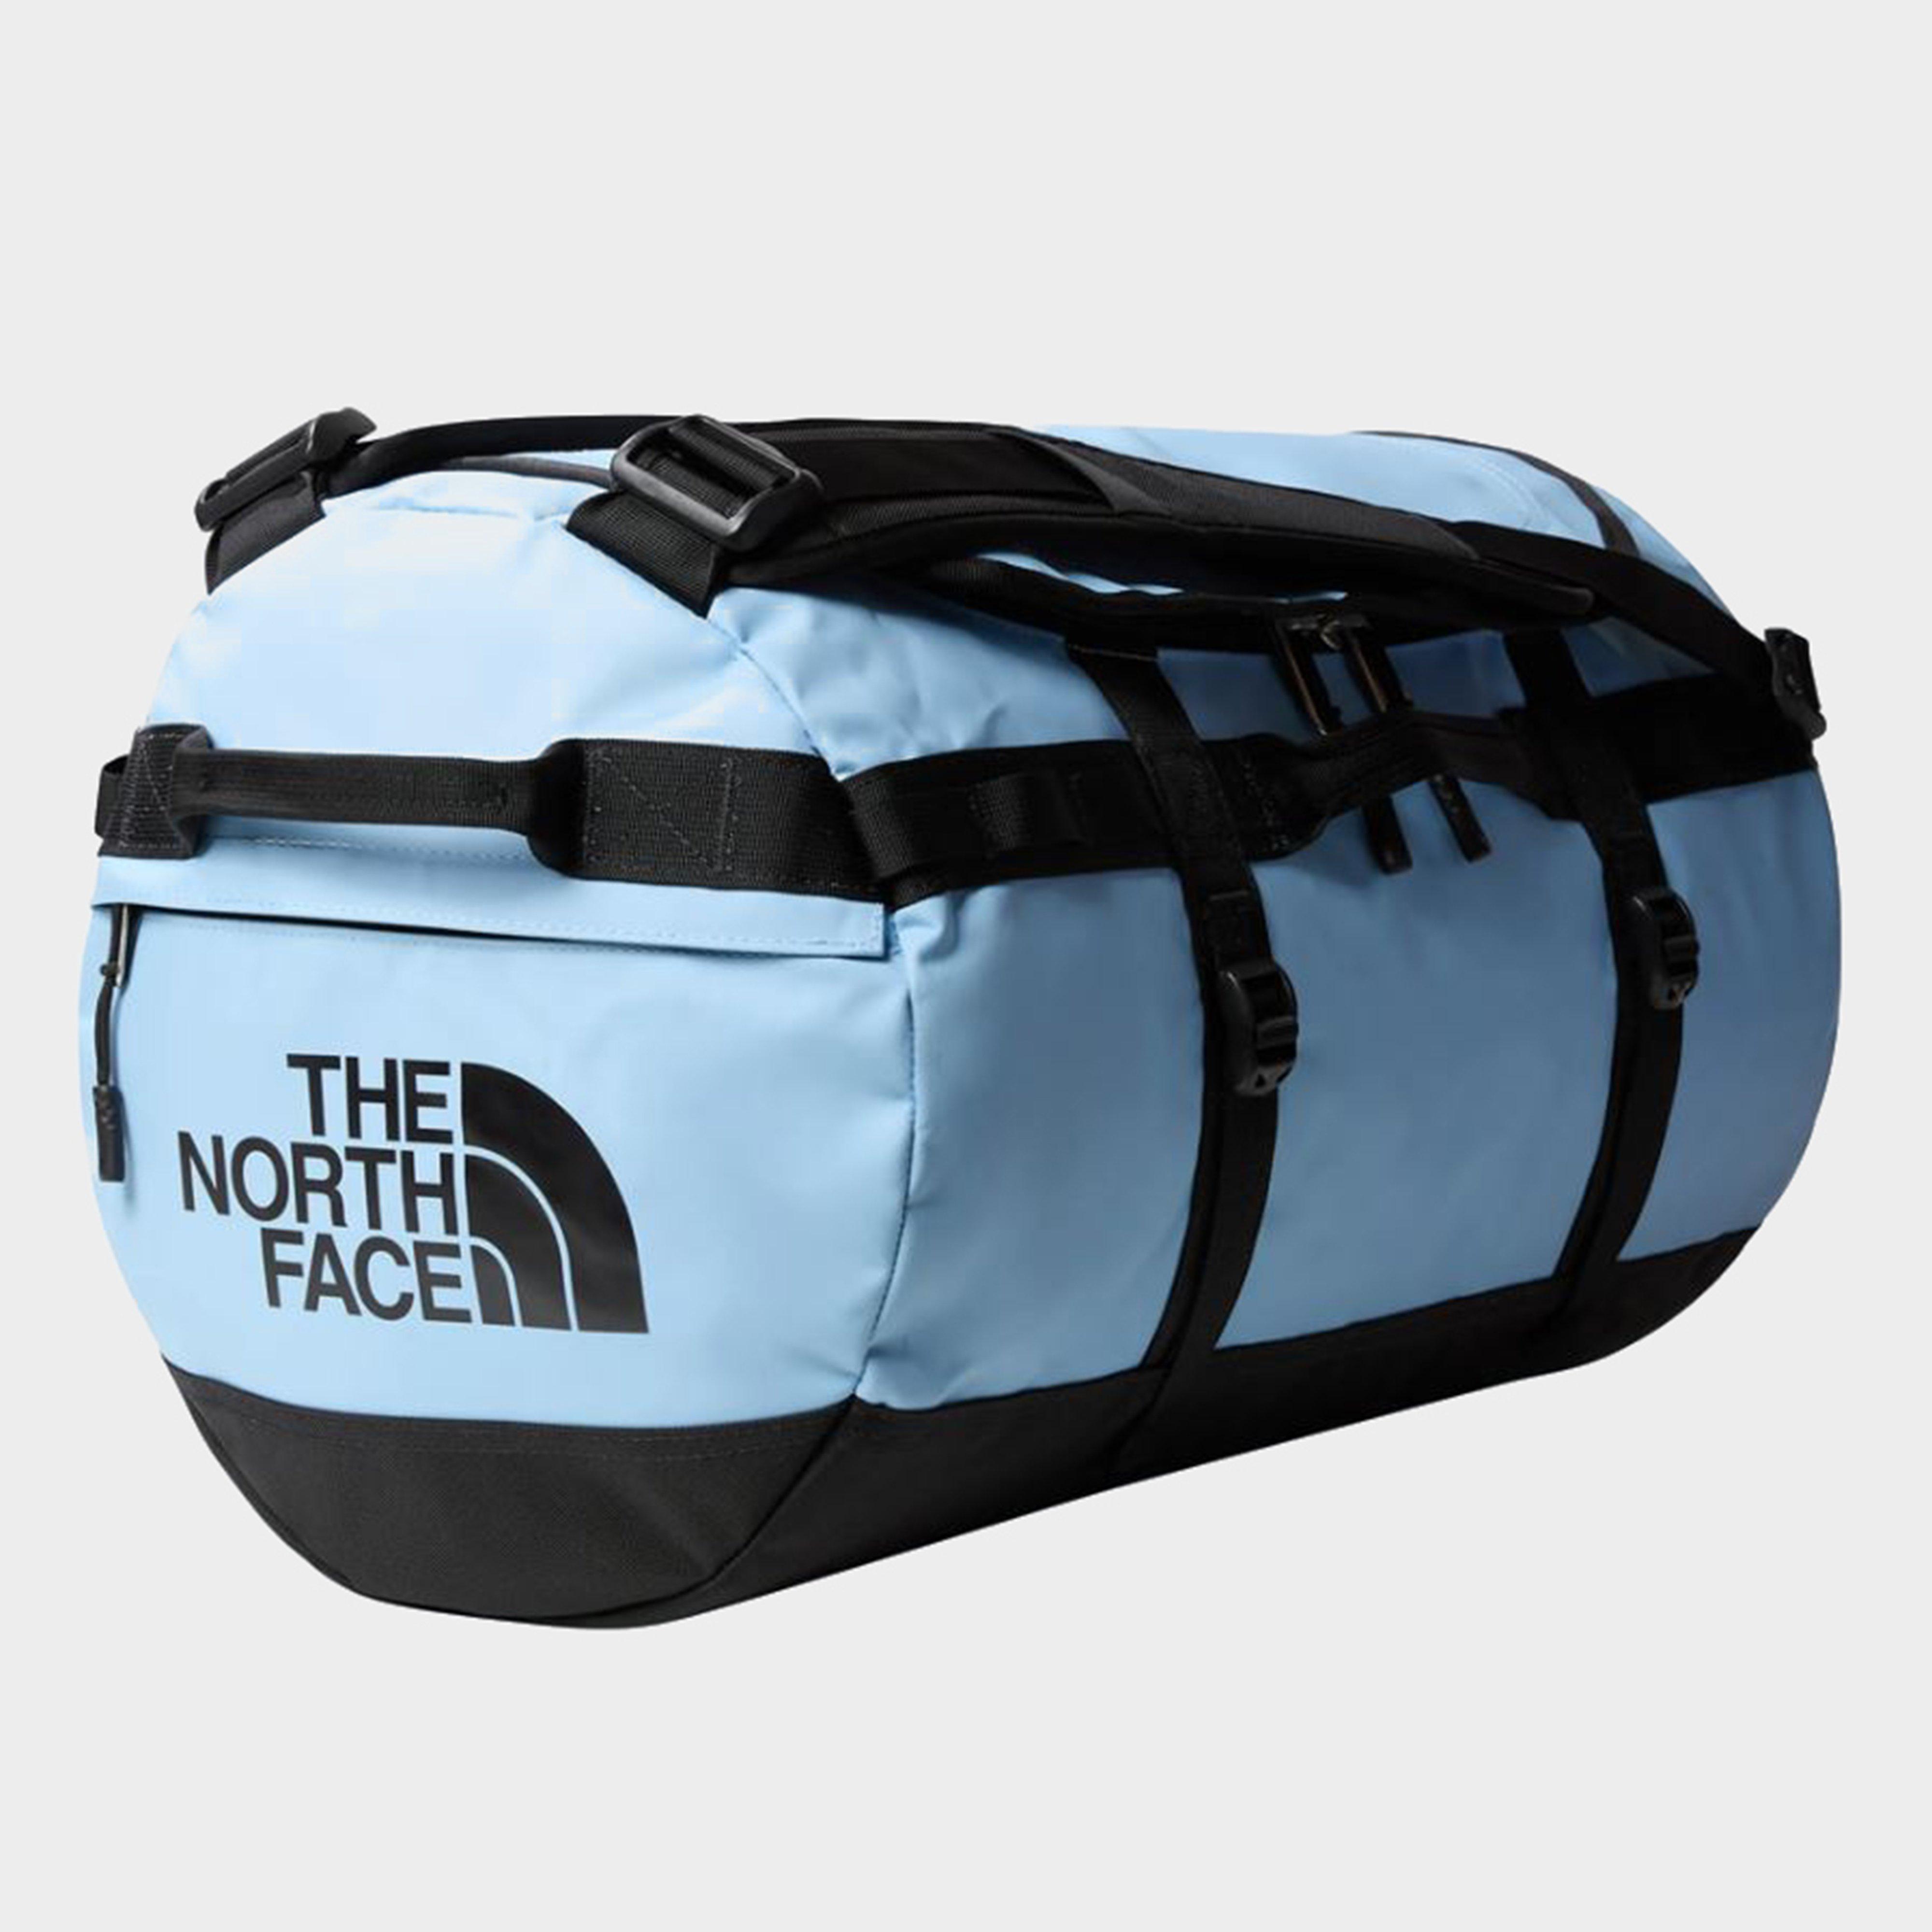 The North Face The North Face Basecamp Duffel Bag (Small) - Blu, BLU